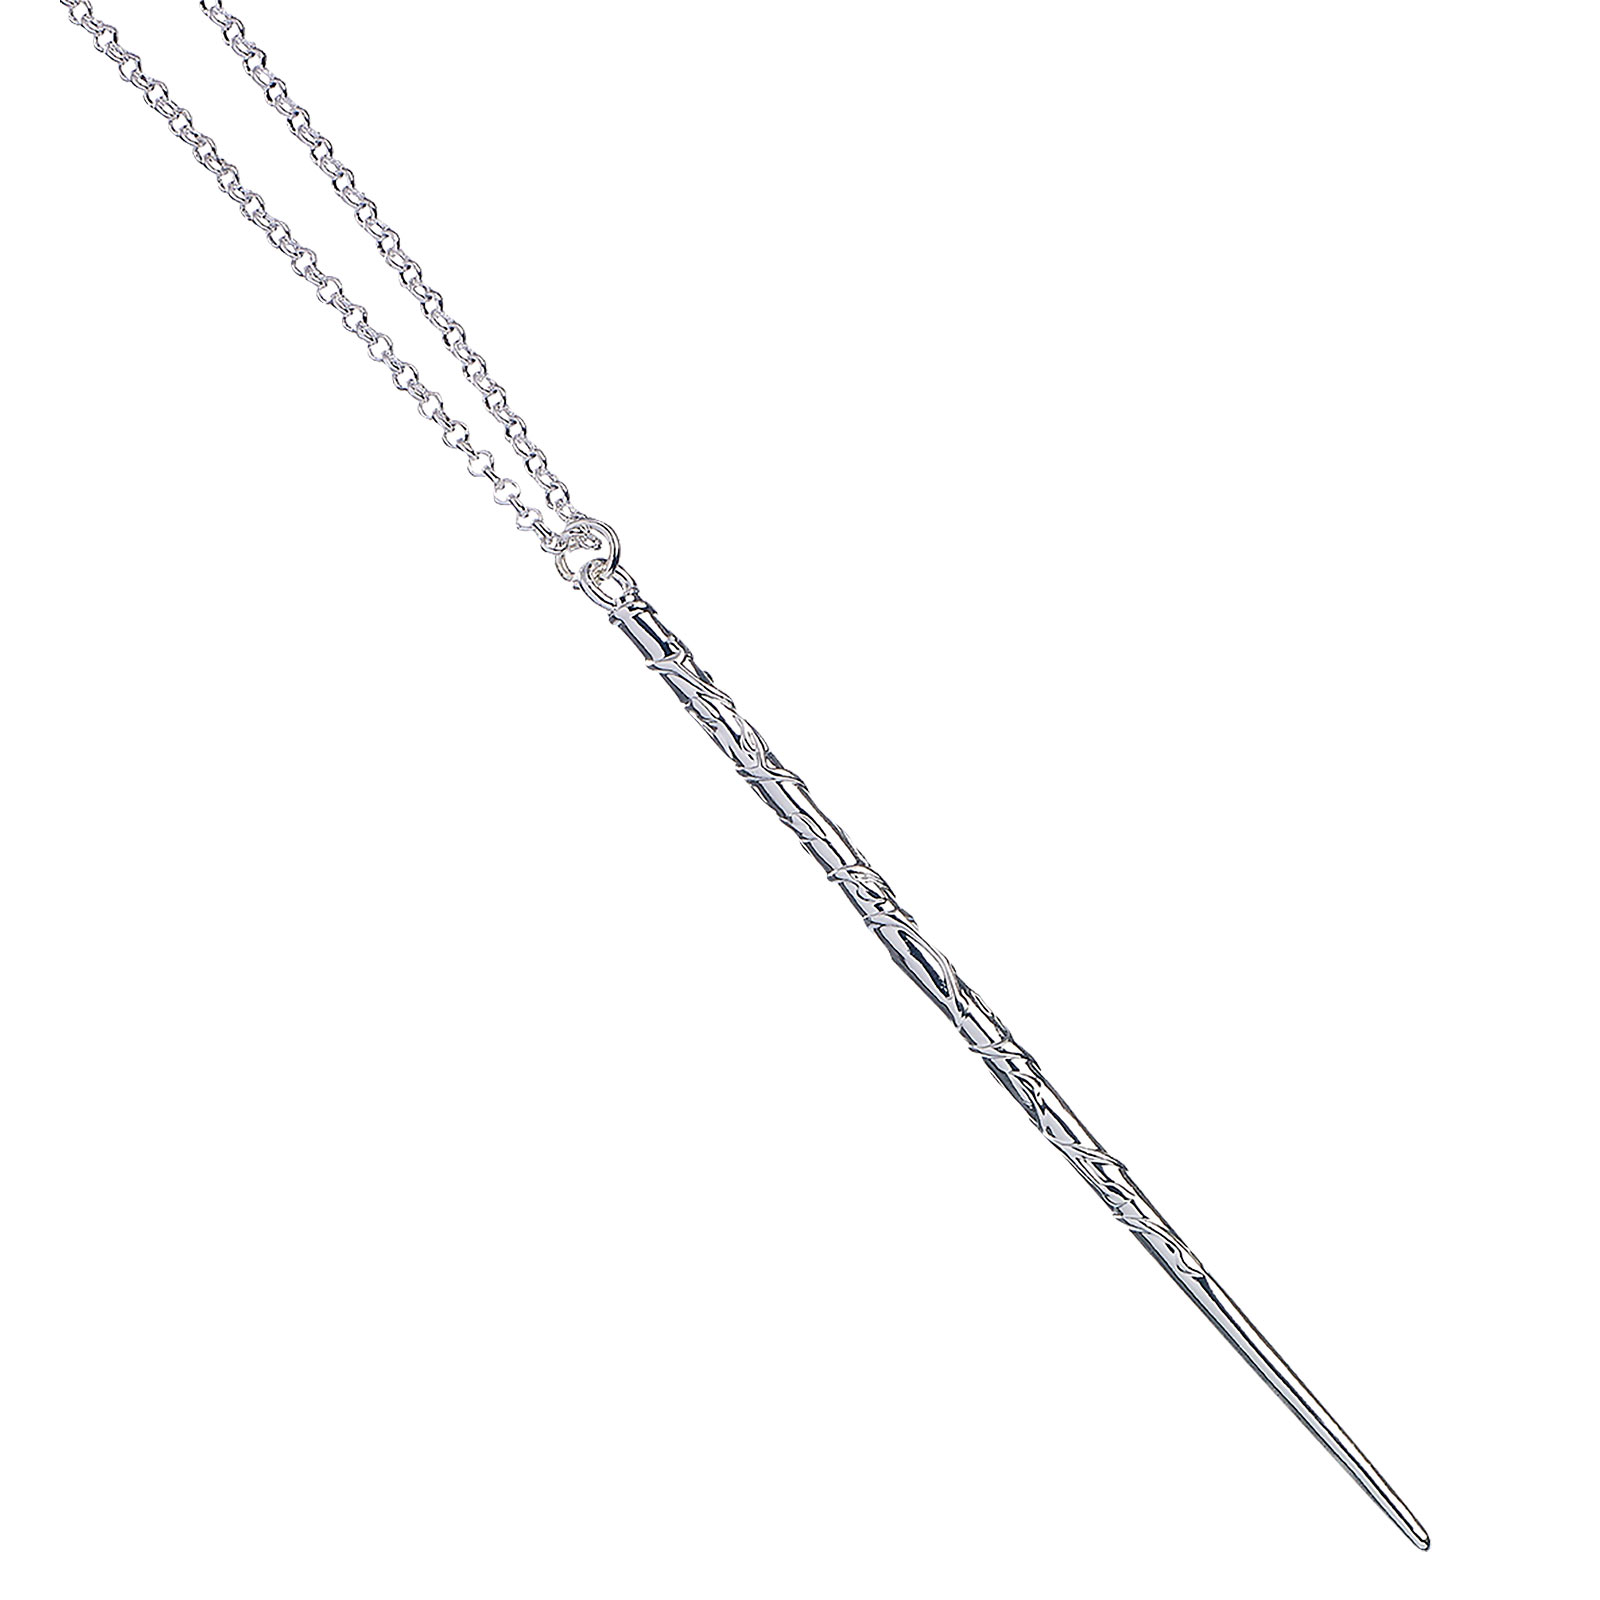 Harry Potter - Hermione Magic Wand Necklace